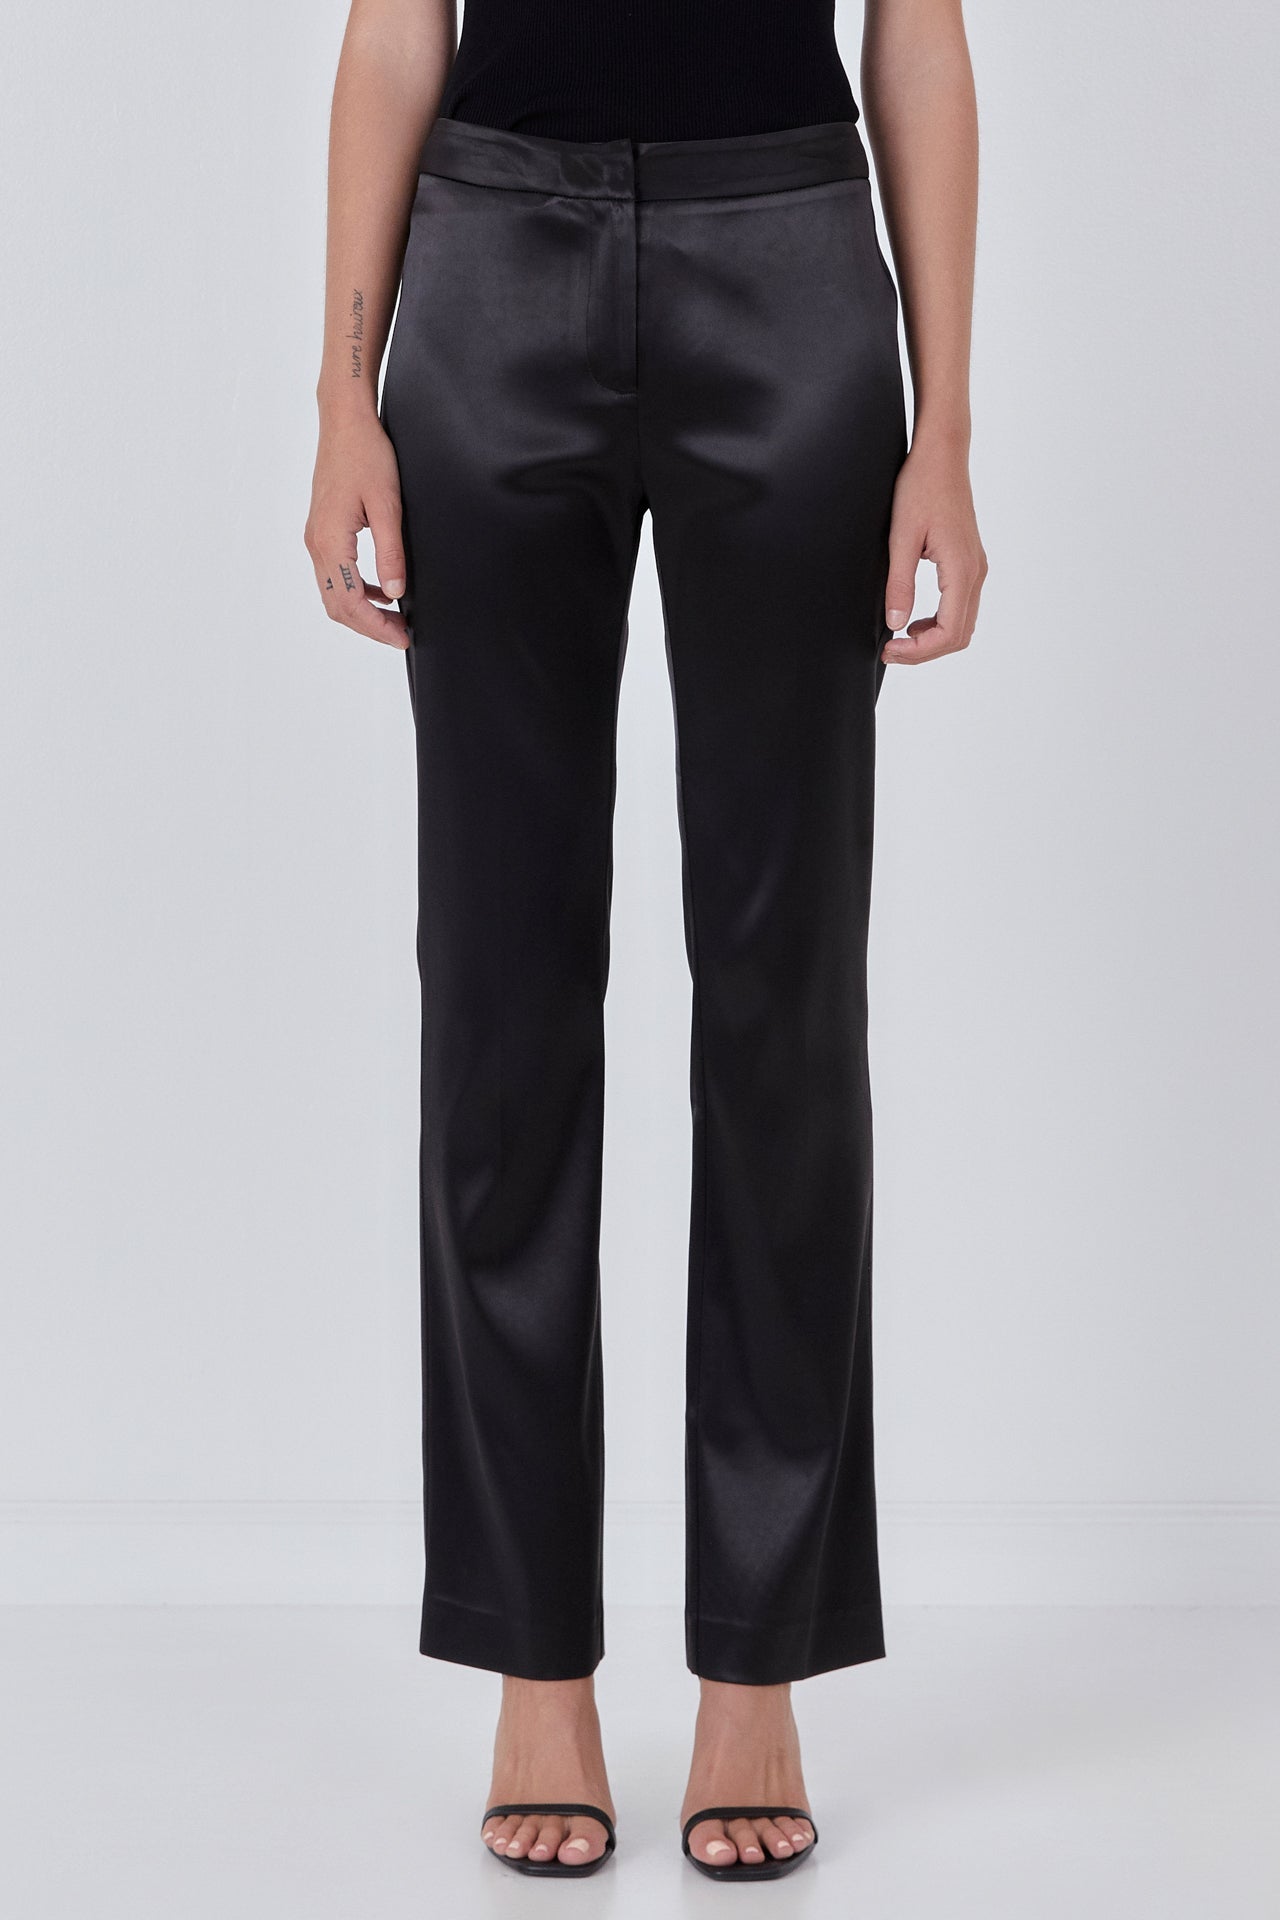 Endless Rose - Flared Solid Trouser - Pants in Women's Clothing available at endlessrose.com